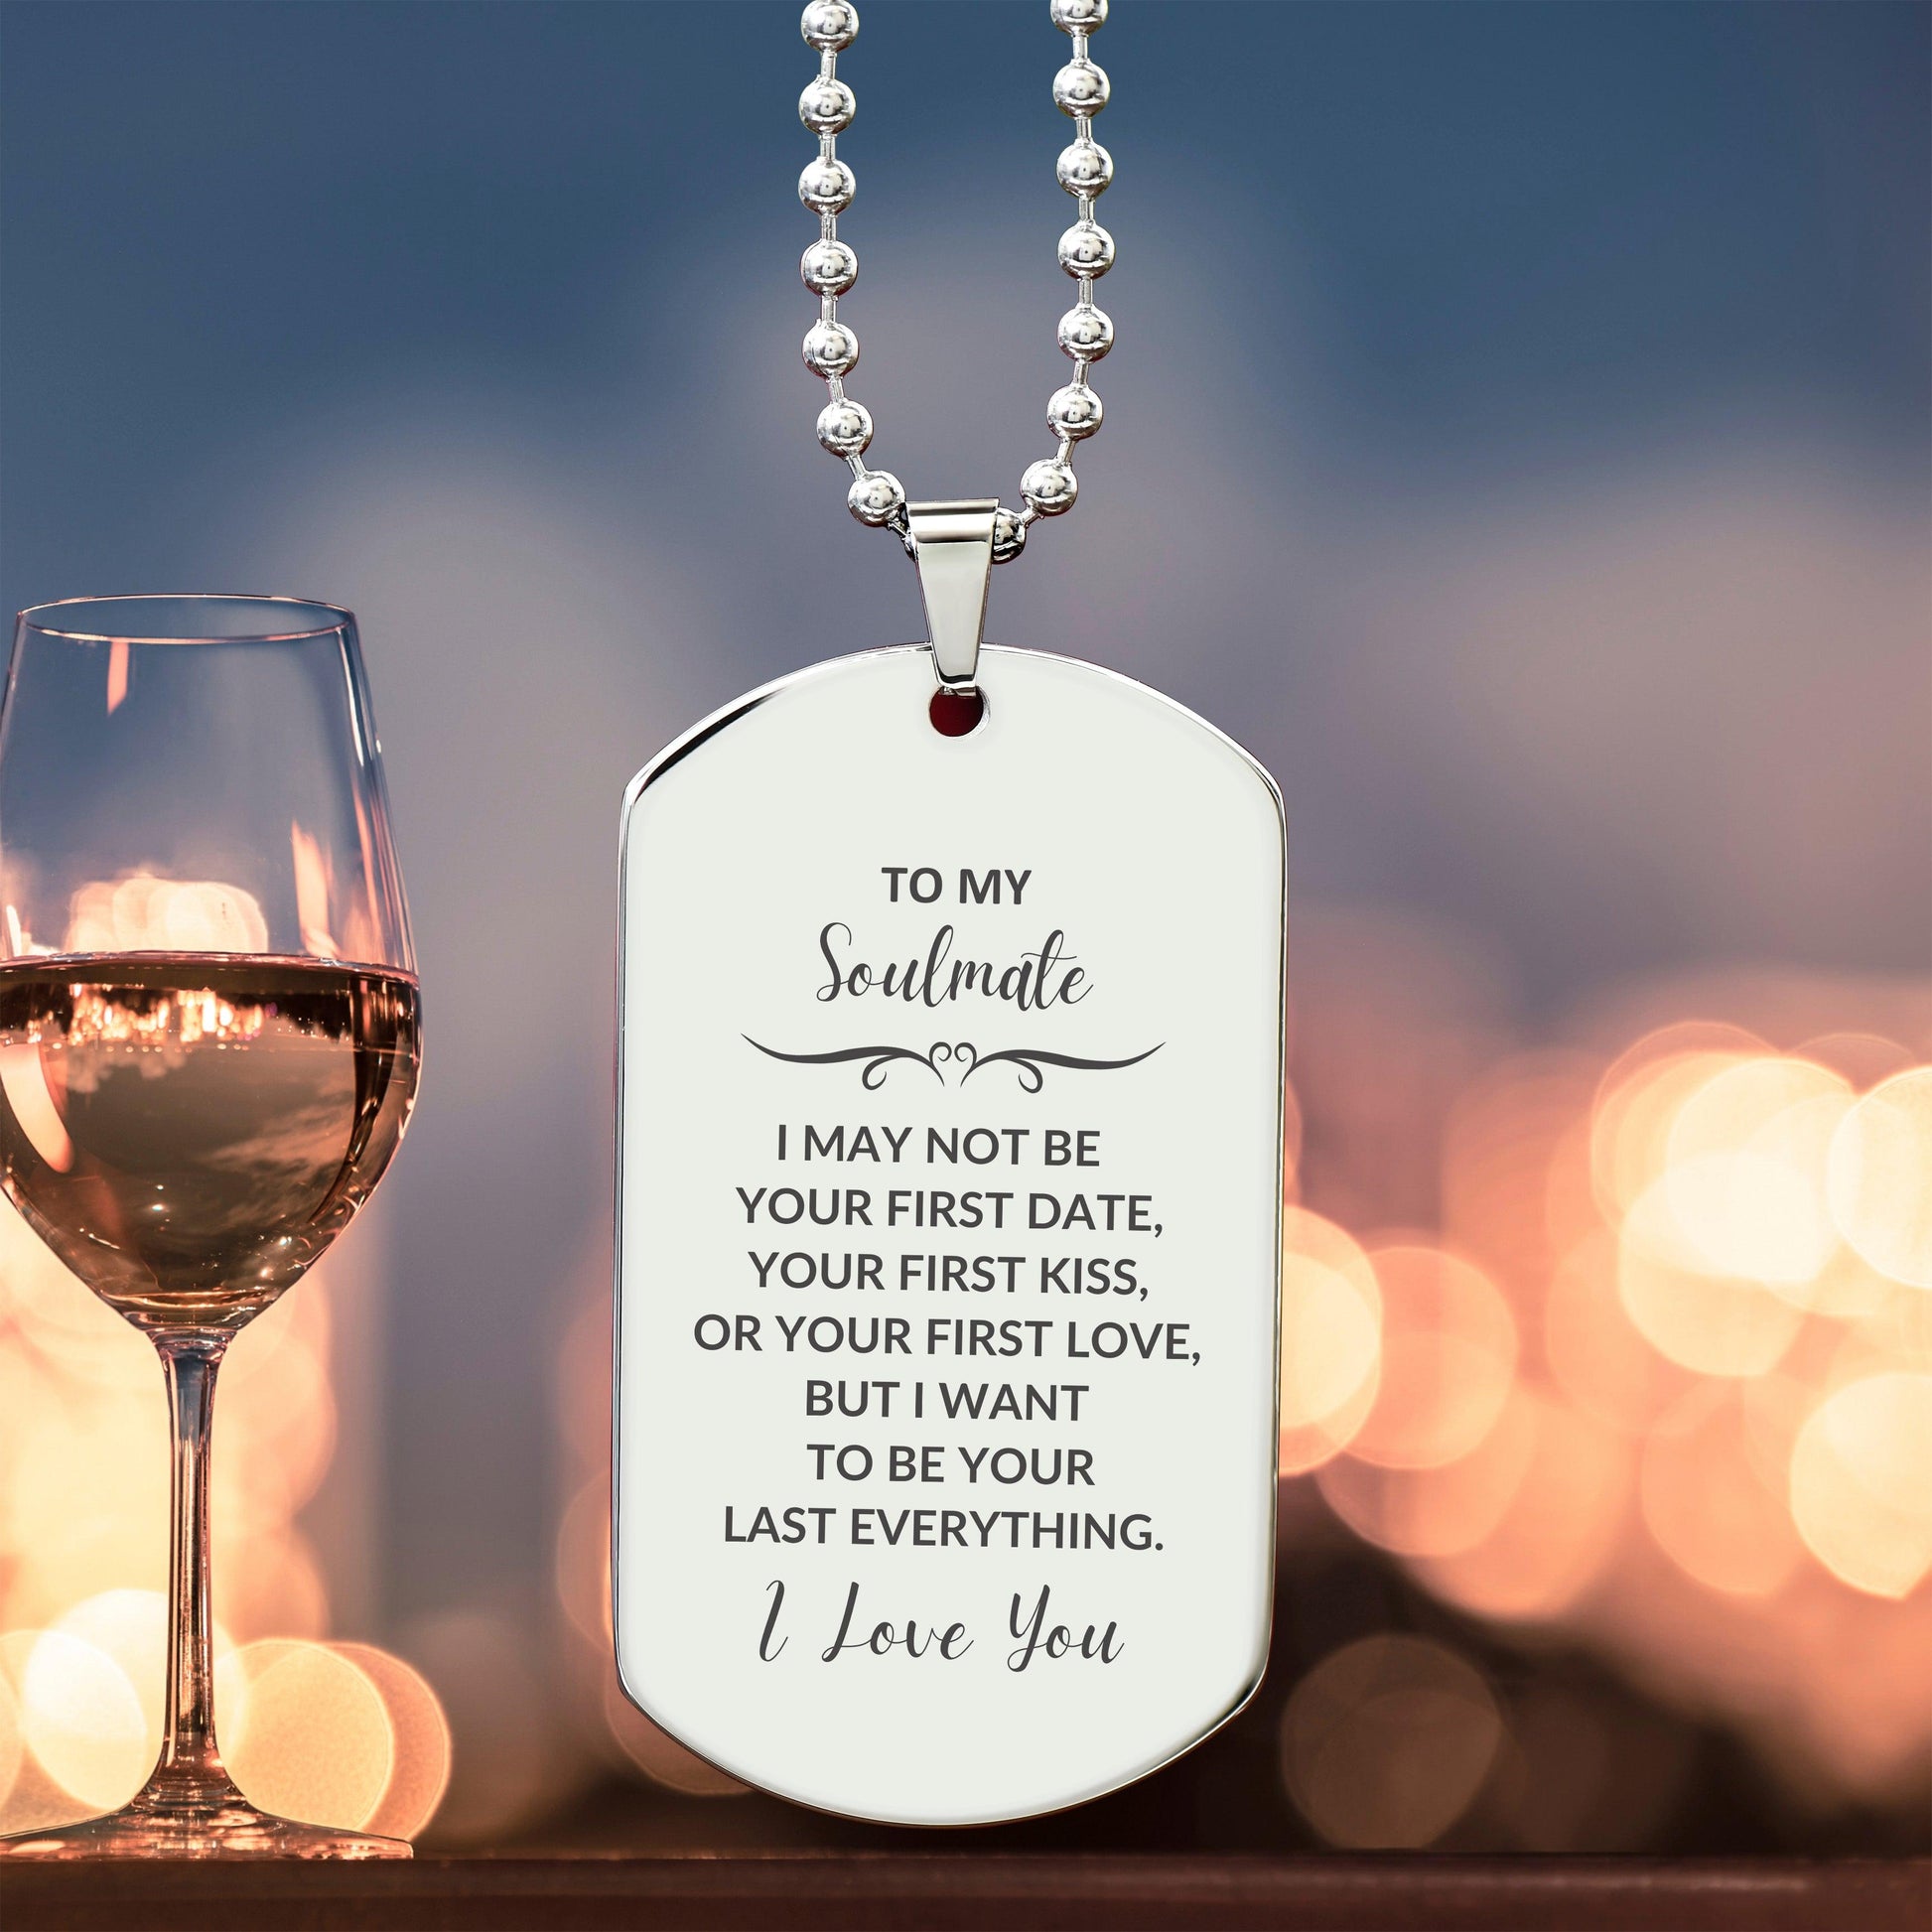 Romantic Soulmate Engraved Silver Dog Tag Necklace - I may not be your First Kiss, But I want to be Your Last Everything Birthday, Christmas Holiday Valentine Gifts - Mallard Moon Gift Shop